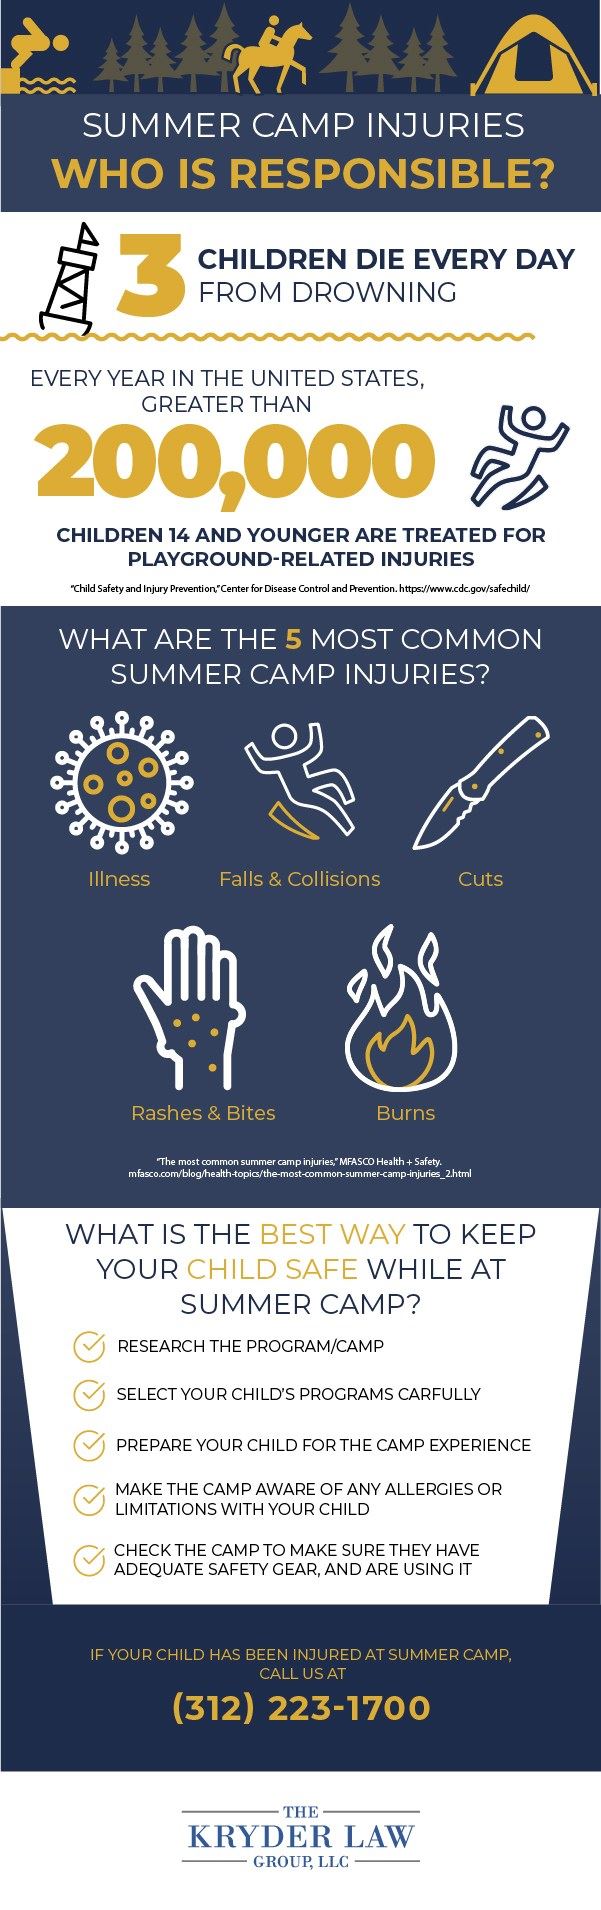 Summer Camp Injuries Infographic